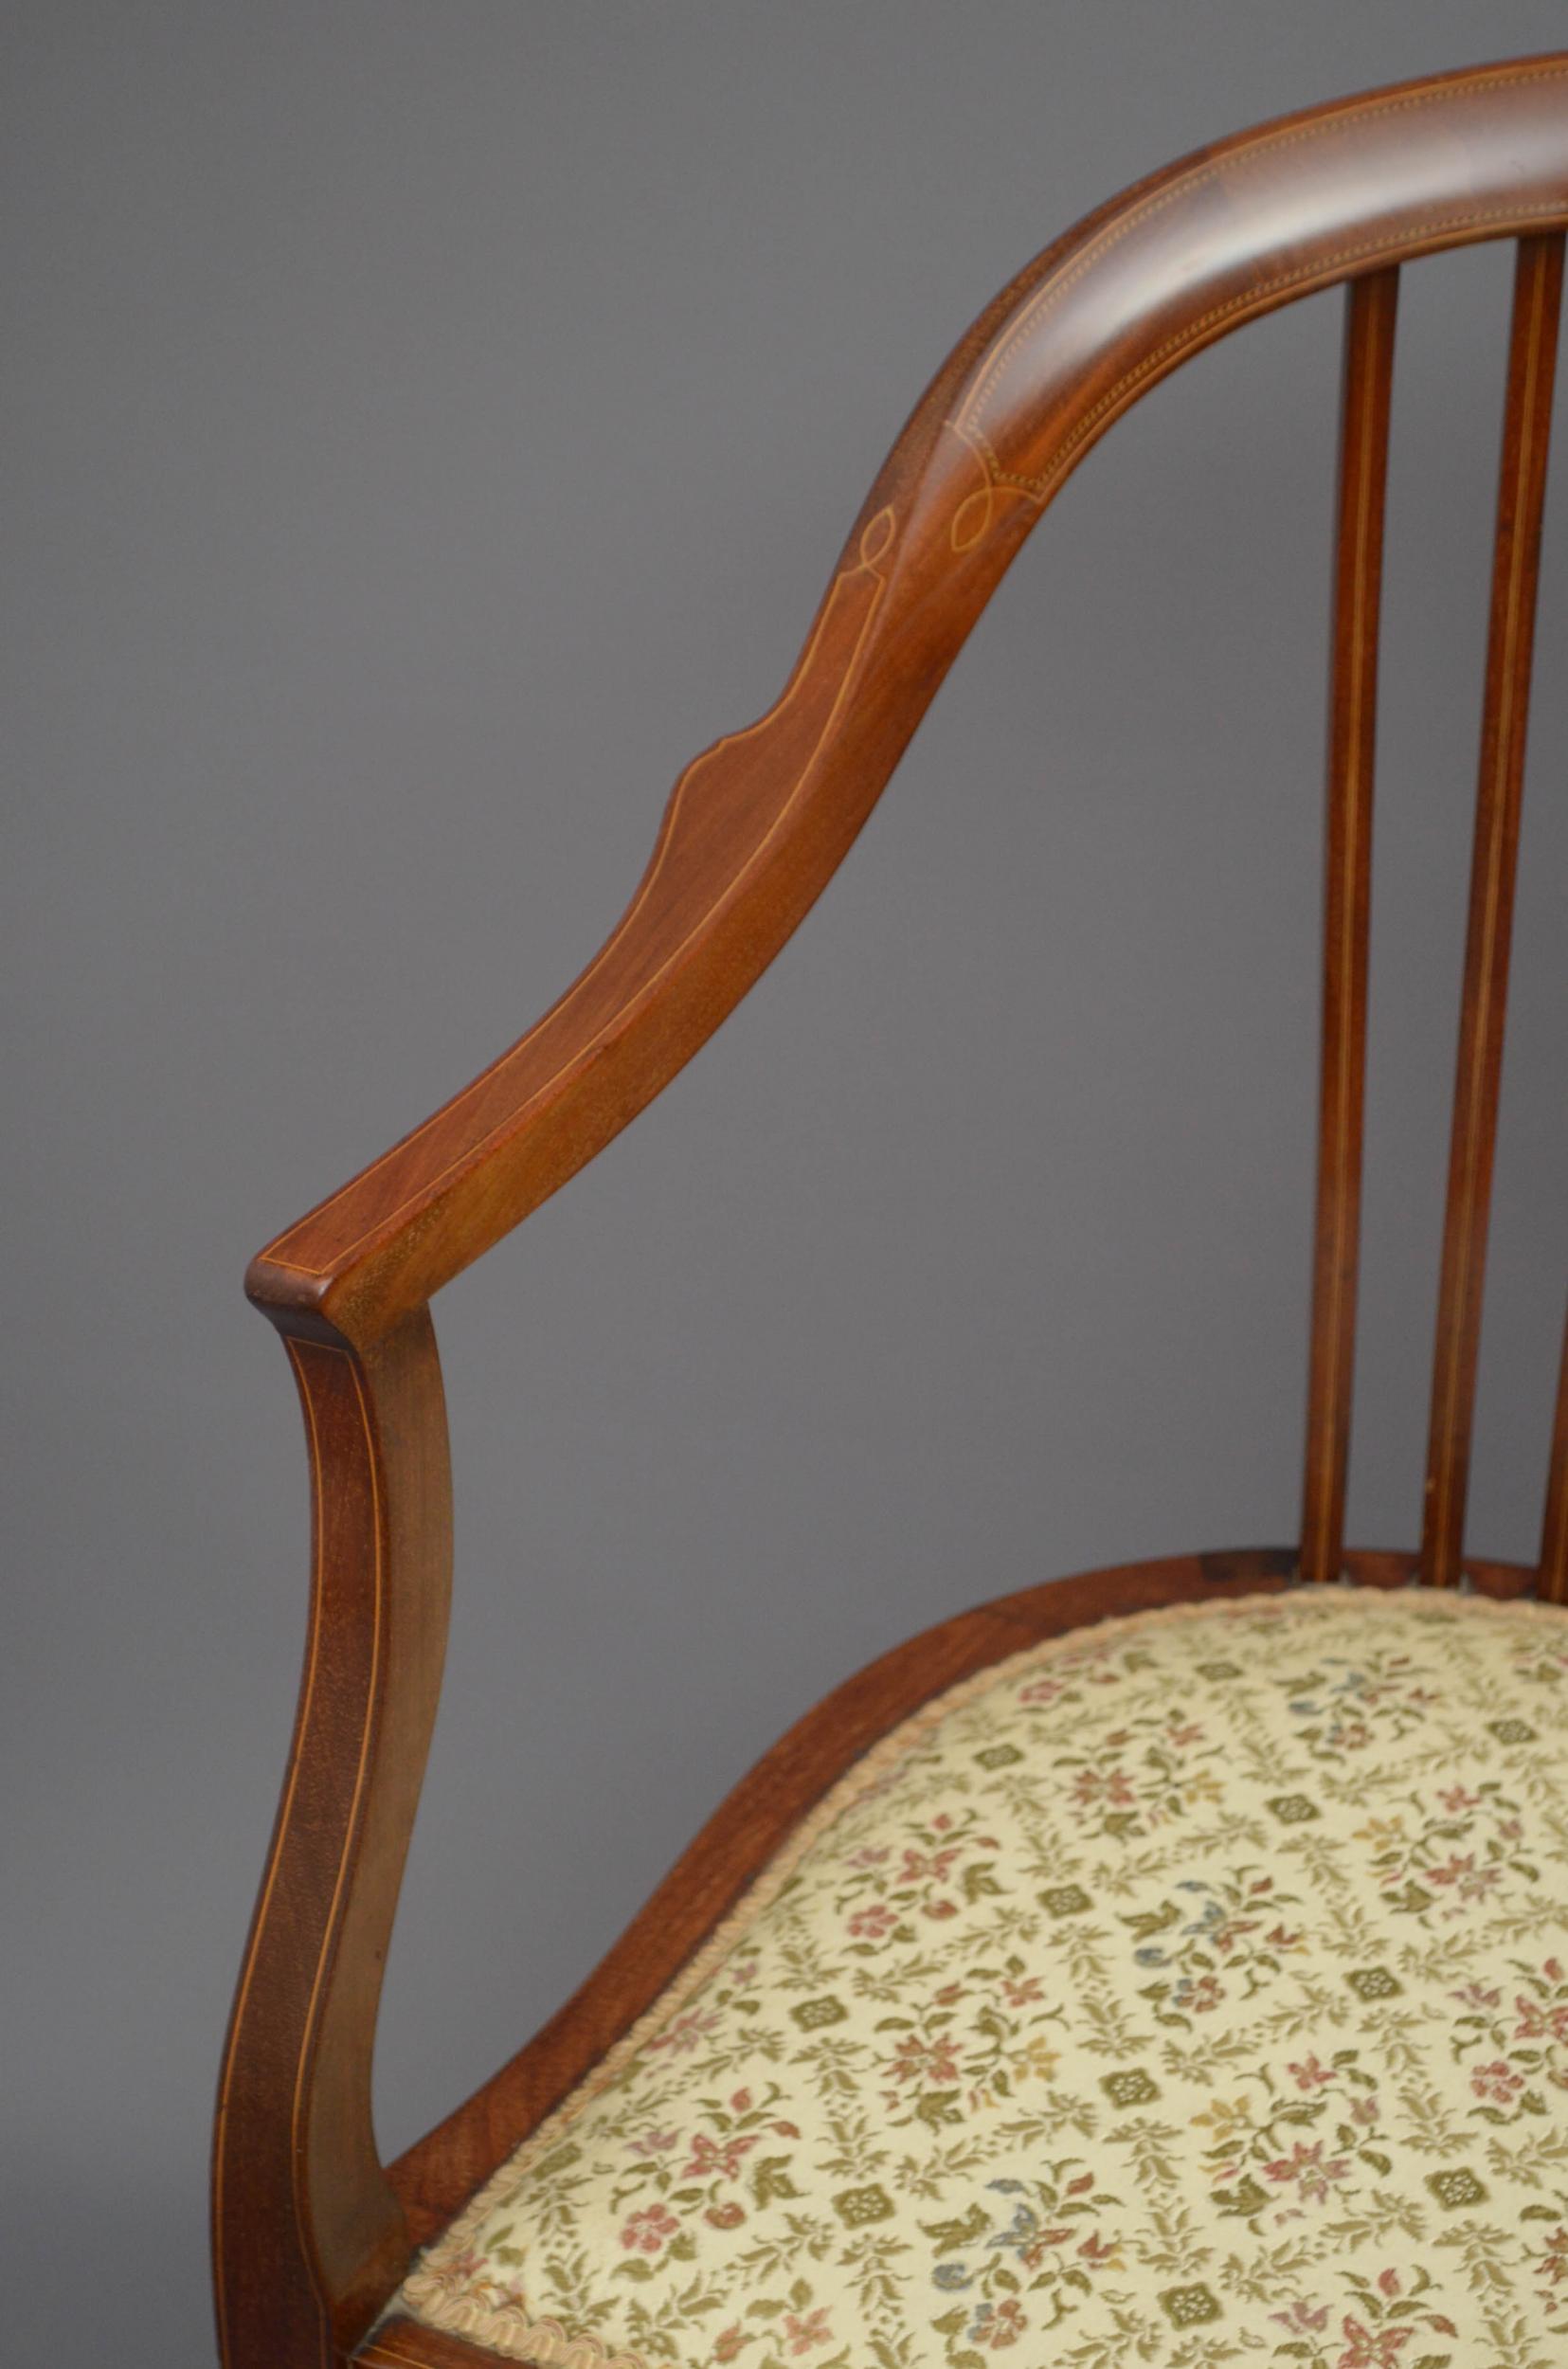 Sn5037 Edwardian, mahogany occasional chair, having curved and amboyna inlaid top rail with satinwood string inlaid slats below, open arms and serpentine seat, all raise on elegant string inlaid legs terminating in pad feet. This antique armchair